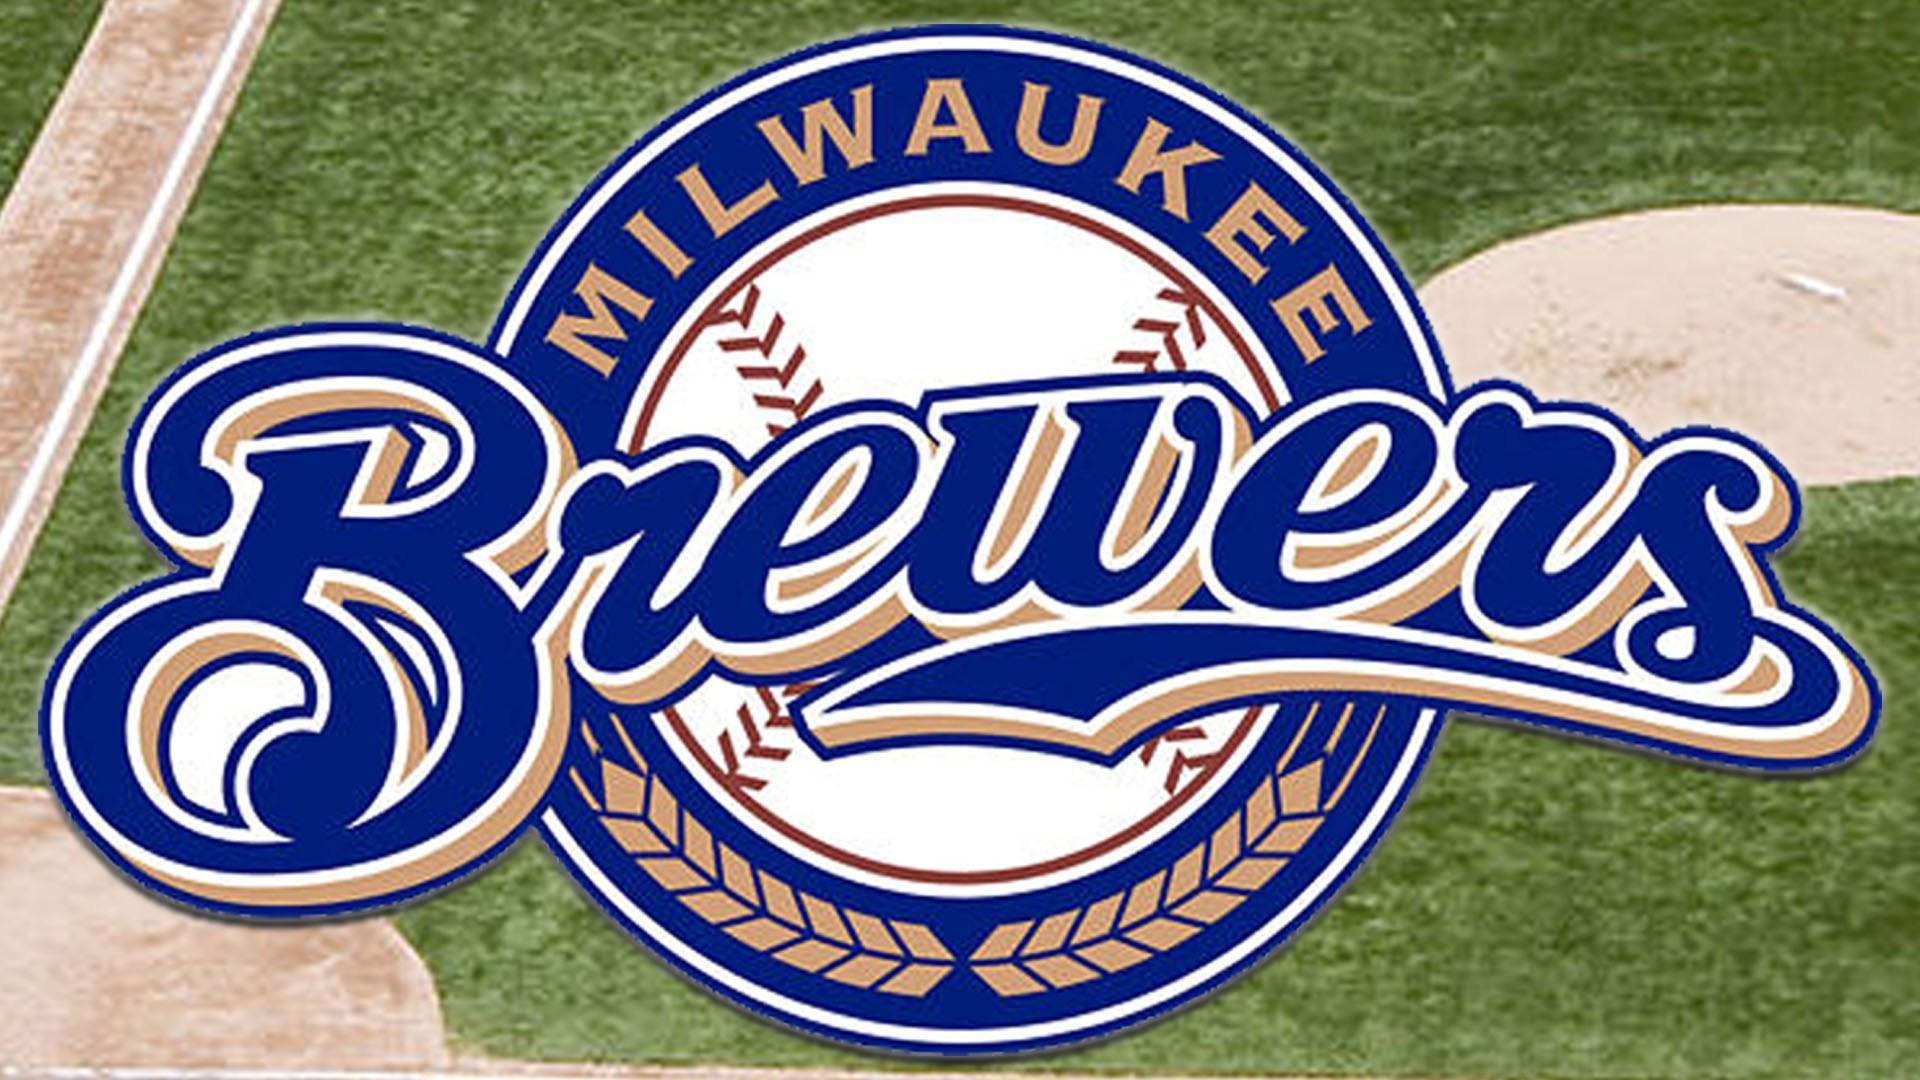 Milwaukee Brewers 2019 Wallpapers - Wallpaper Cave